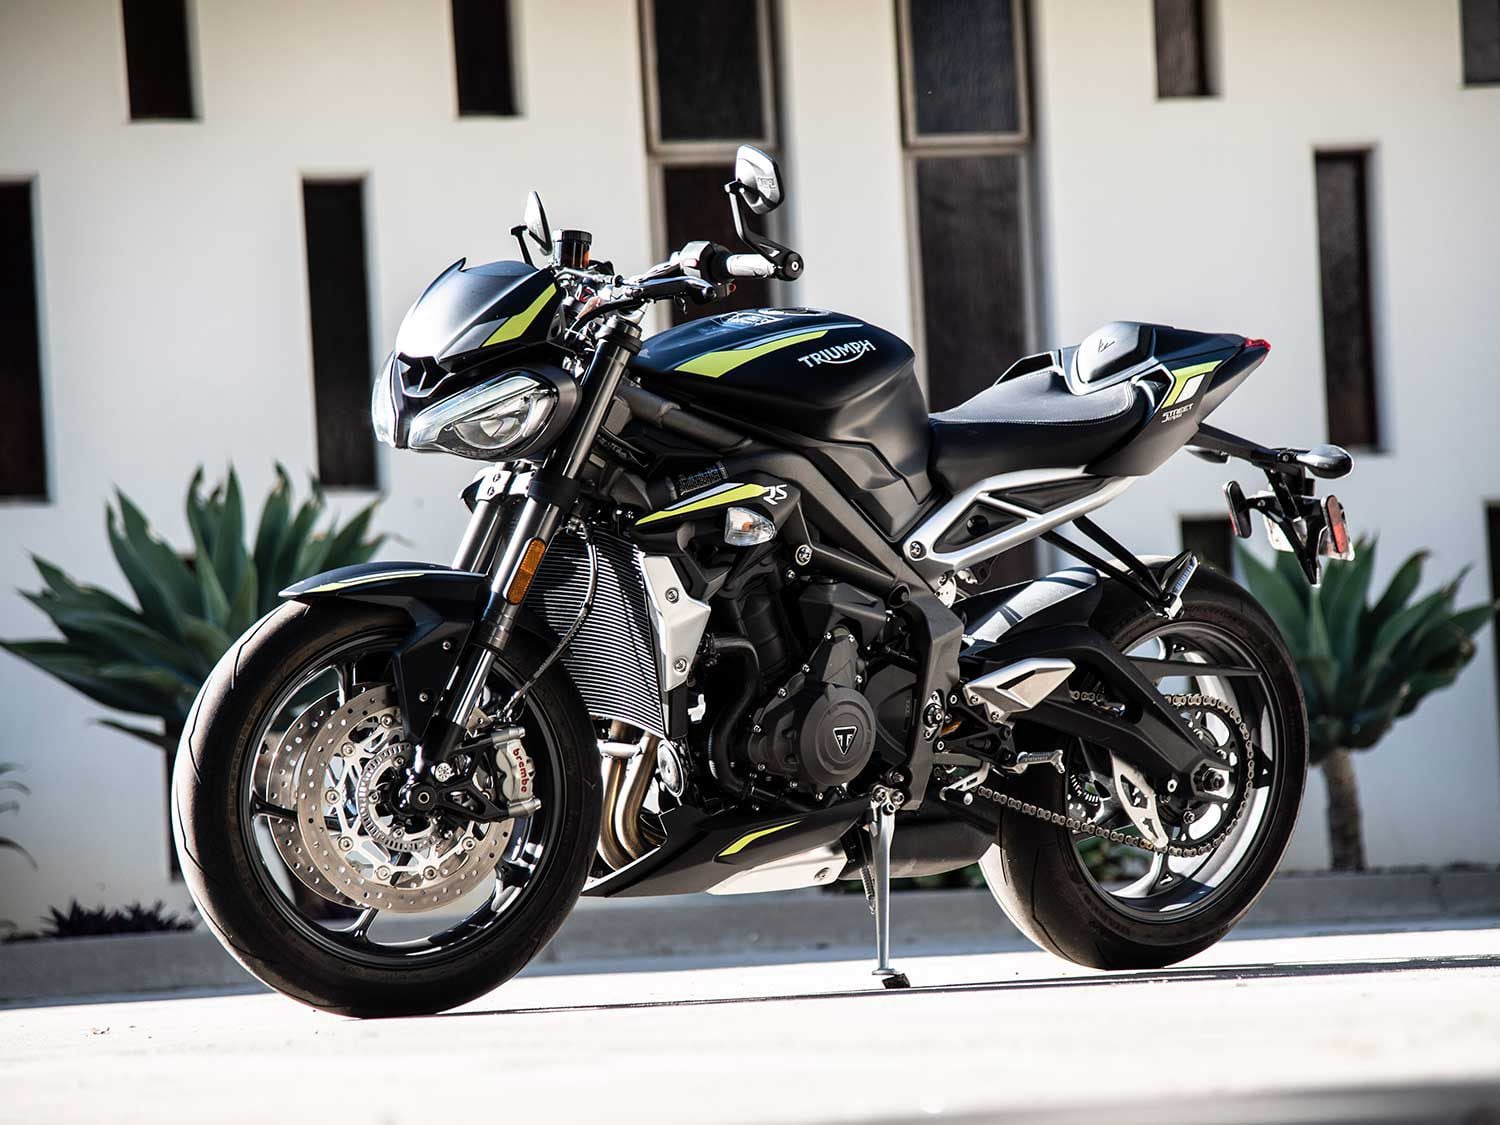 Triumph’s Street Triple RS maintains its streetfighter styling through jagged bodywork and exposed mechanicals.